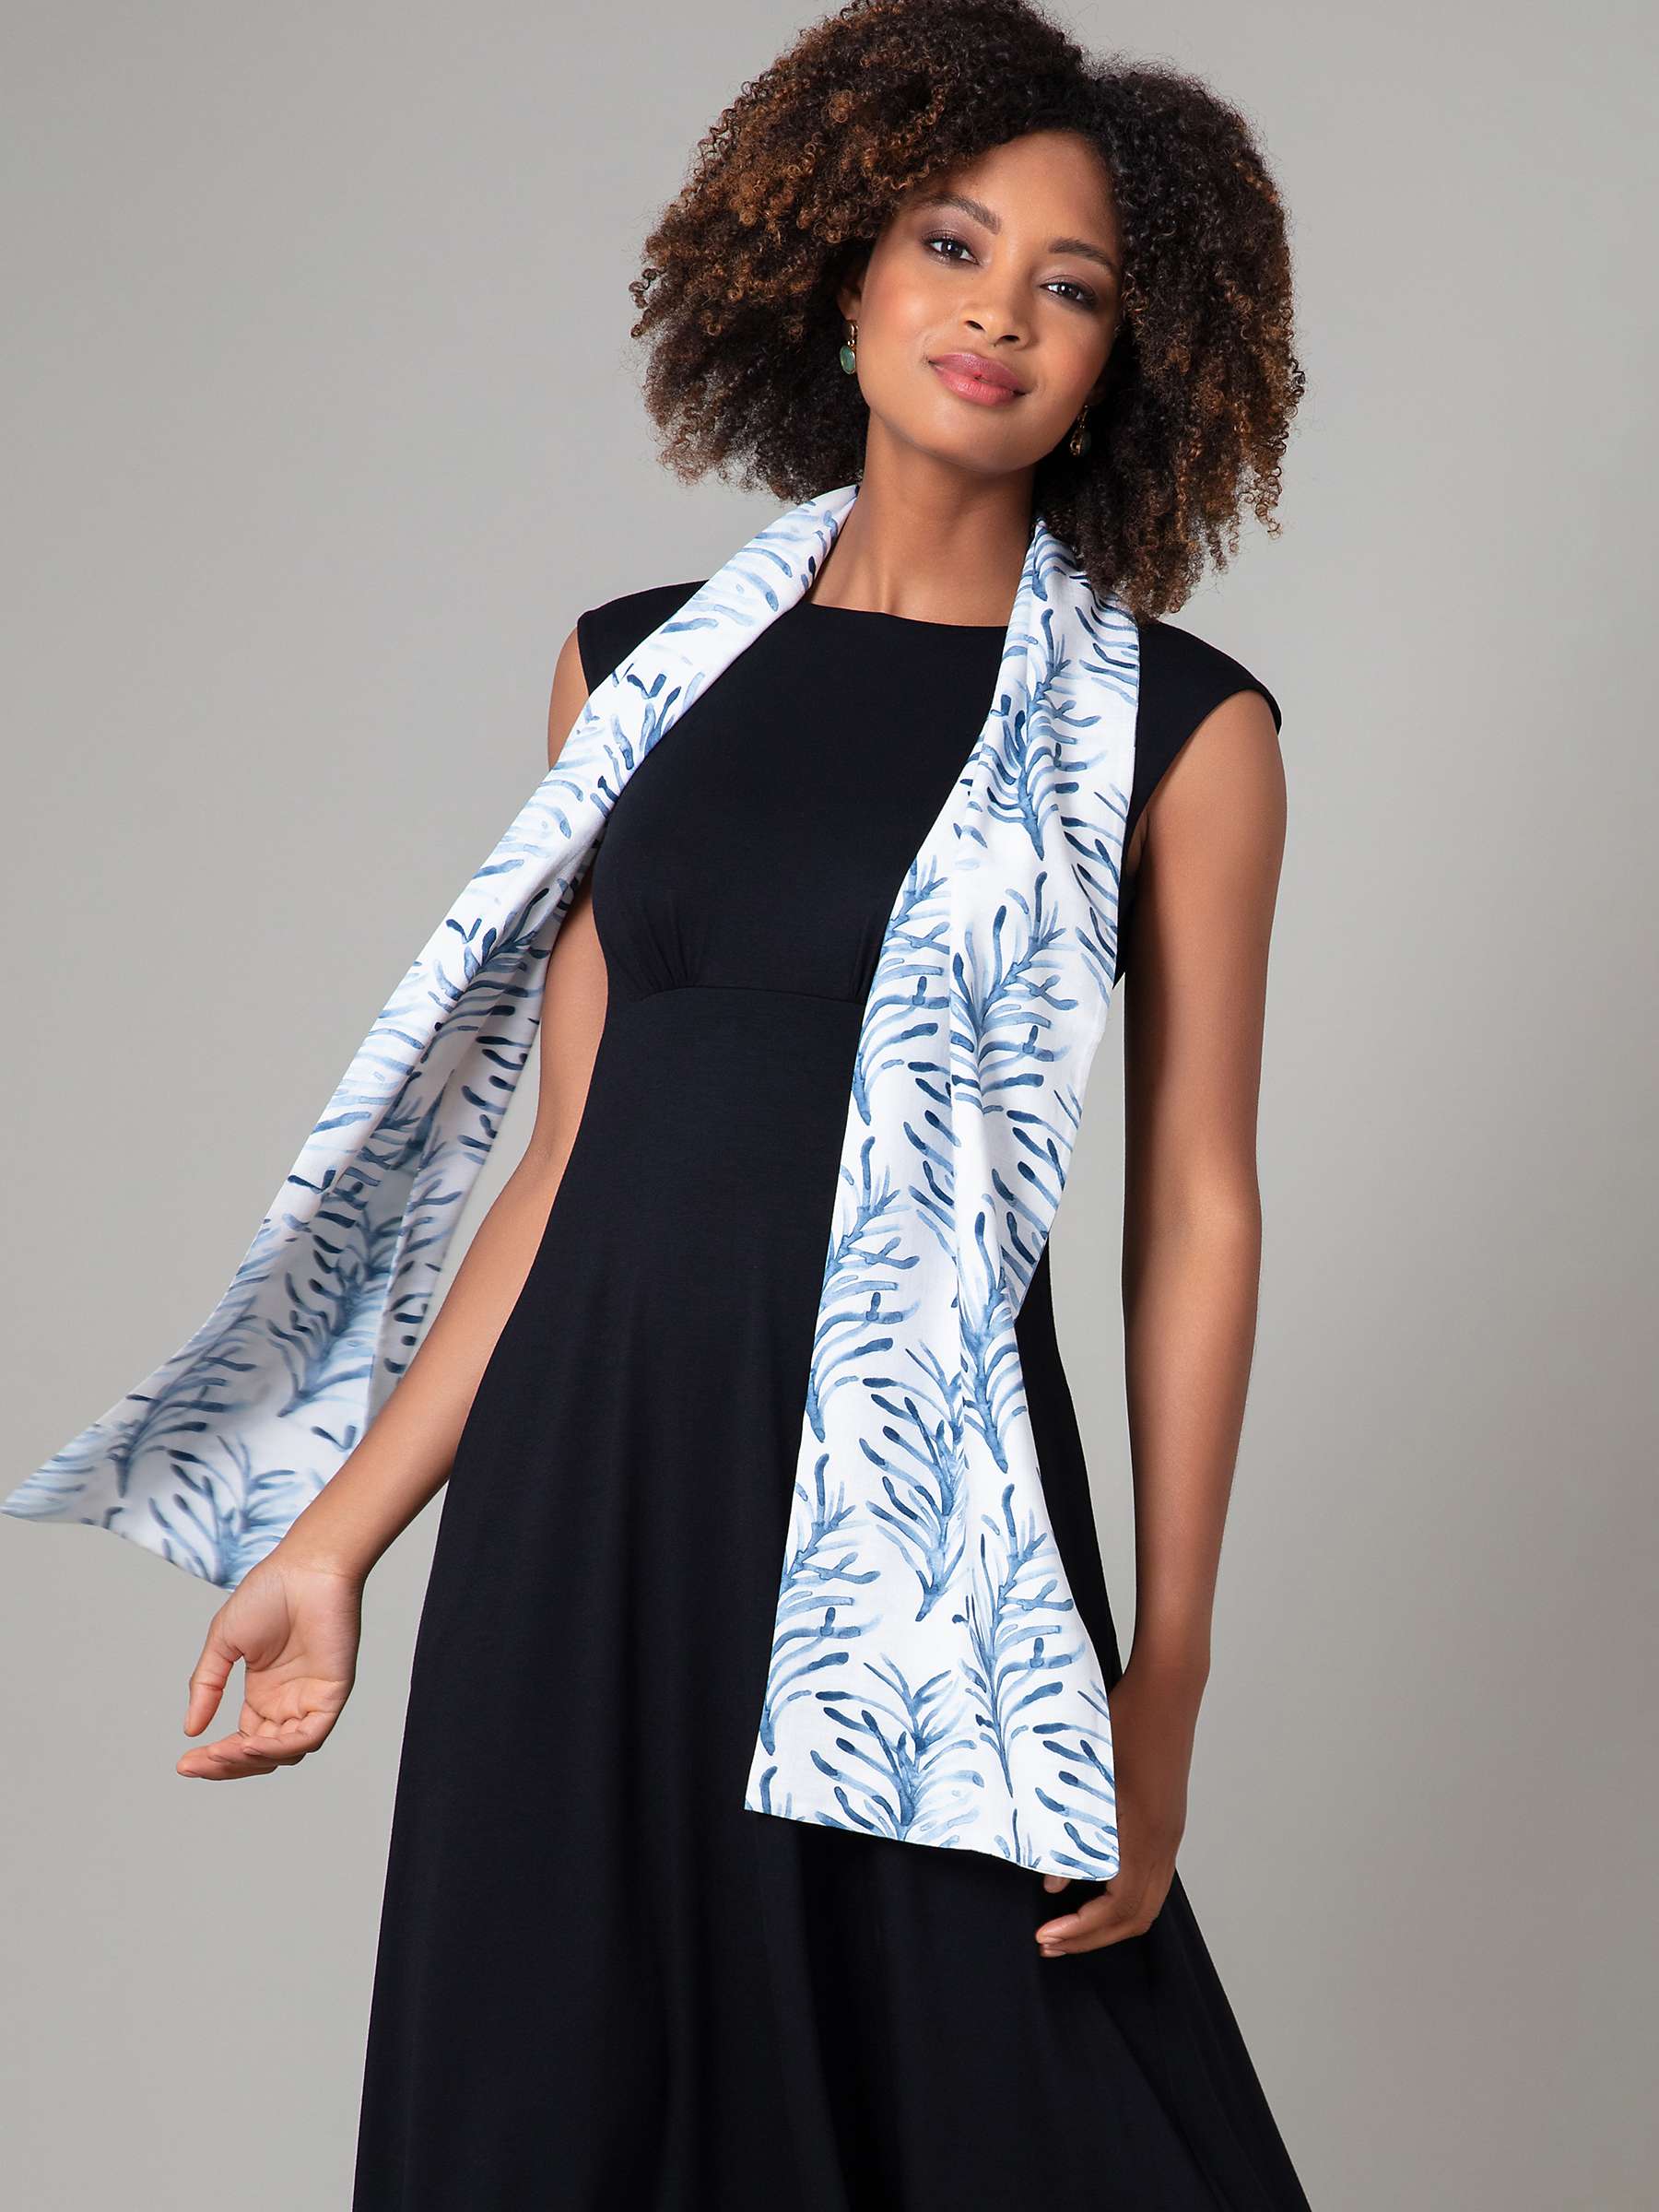 Buy Alie Street Azra Woven Scarf, Blue/White Floral Online at johnlewis.com